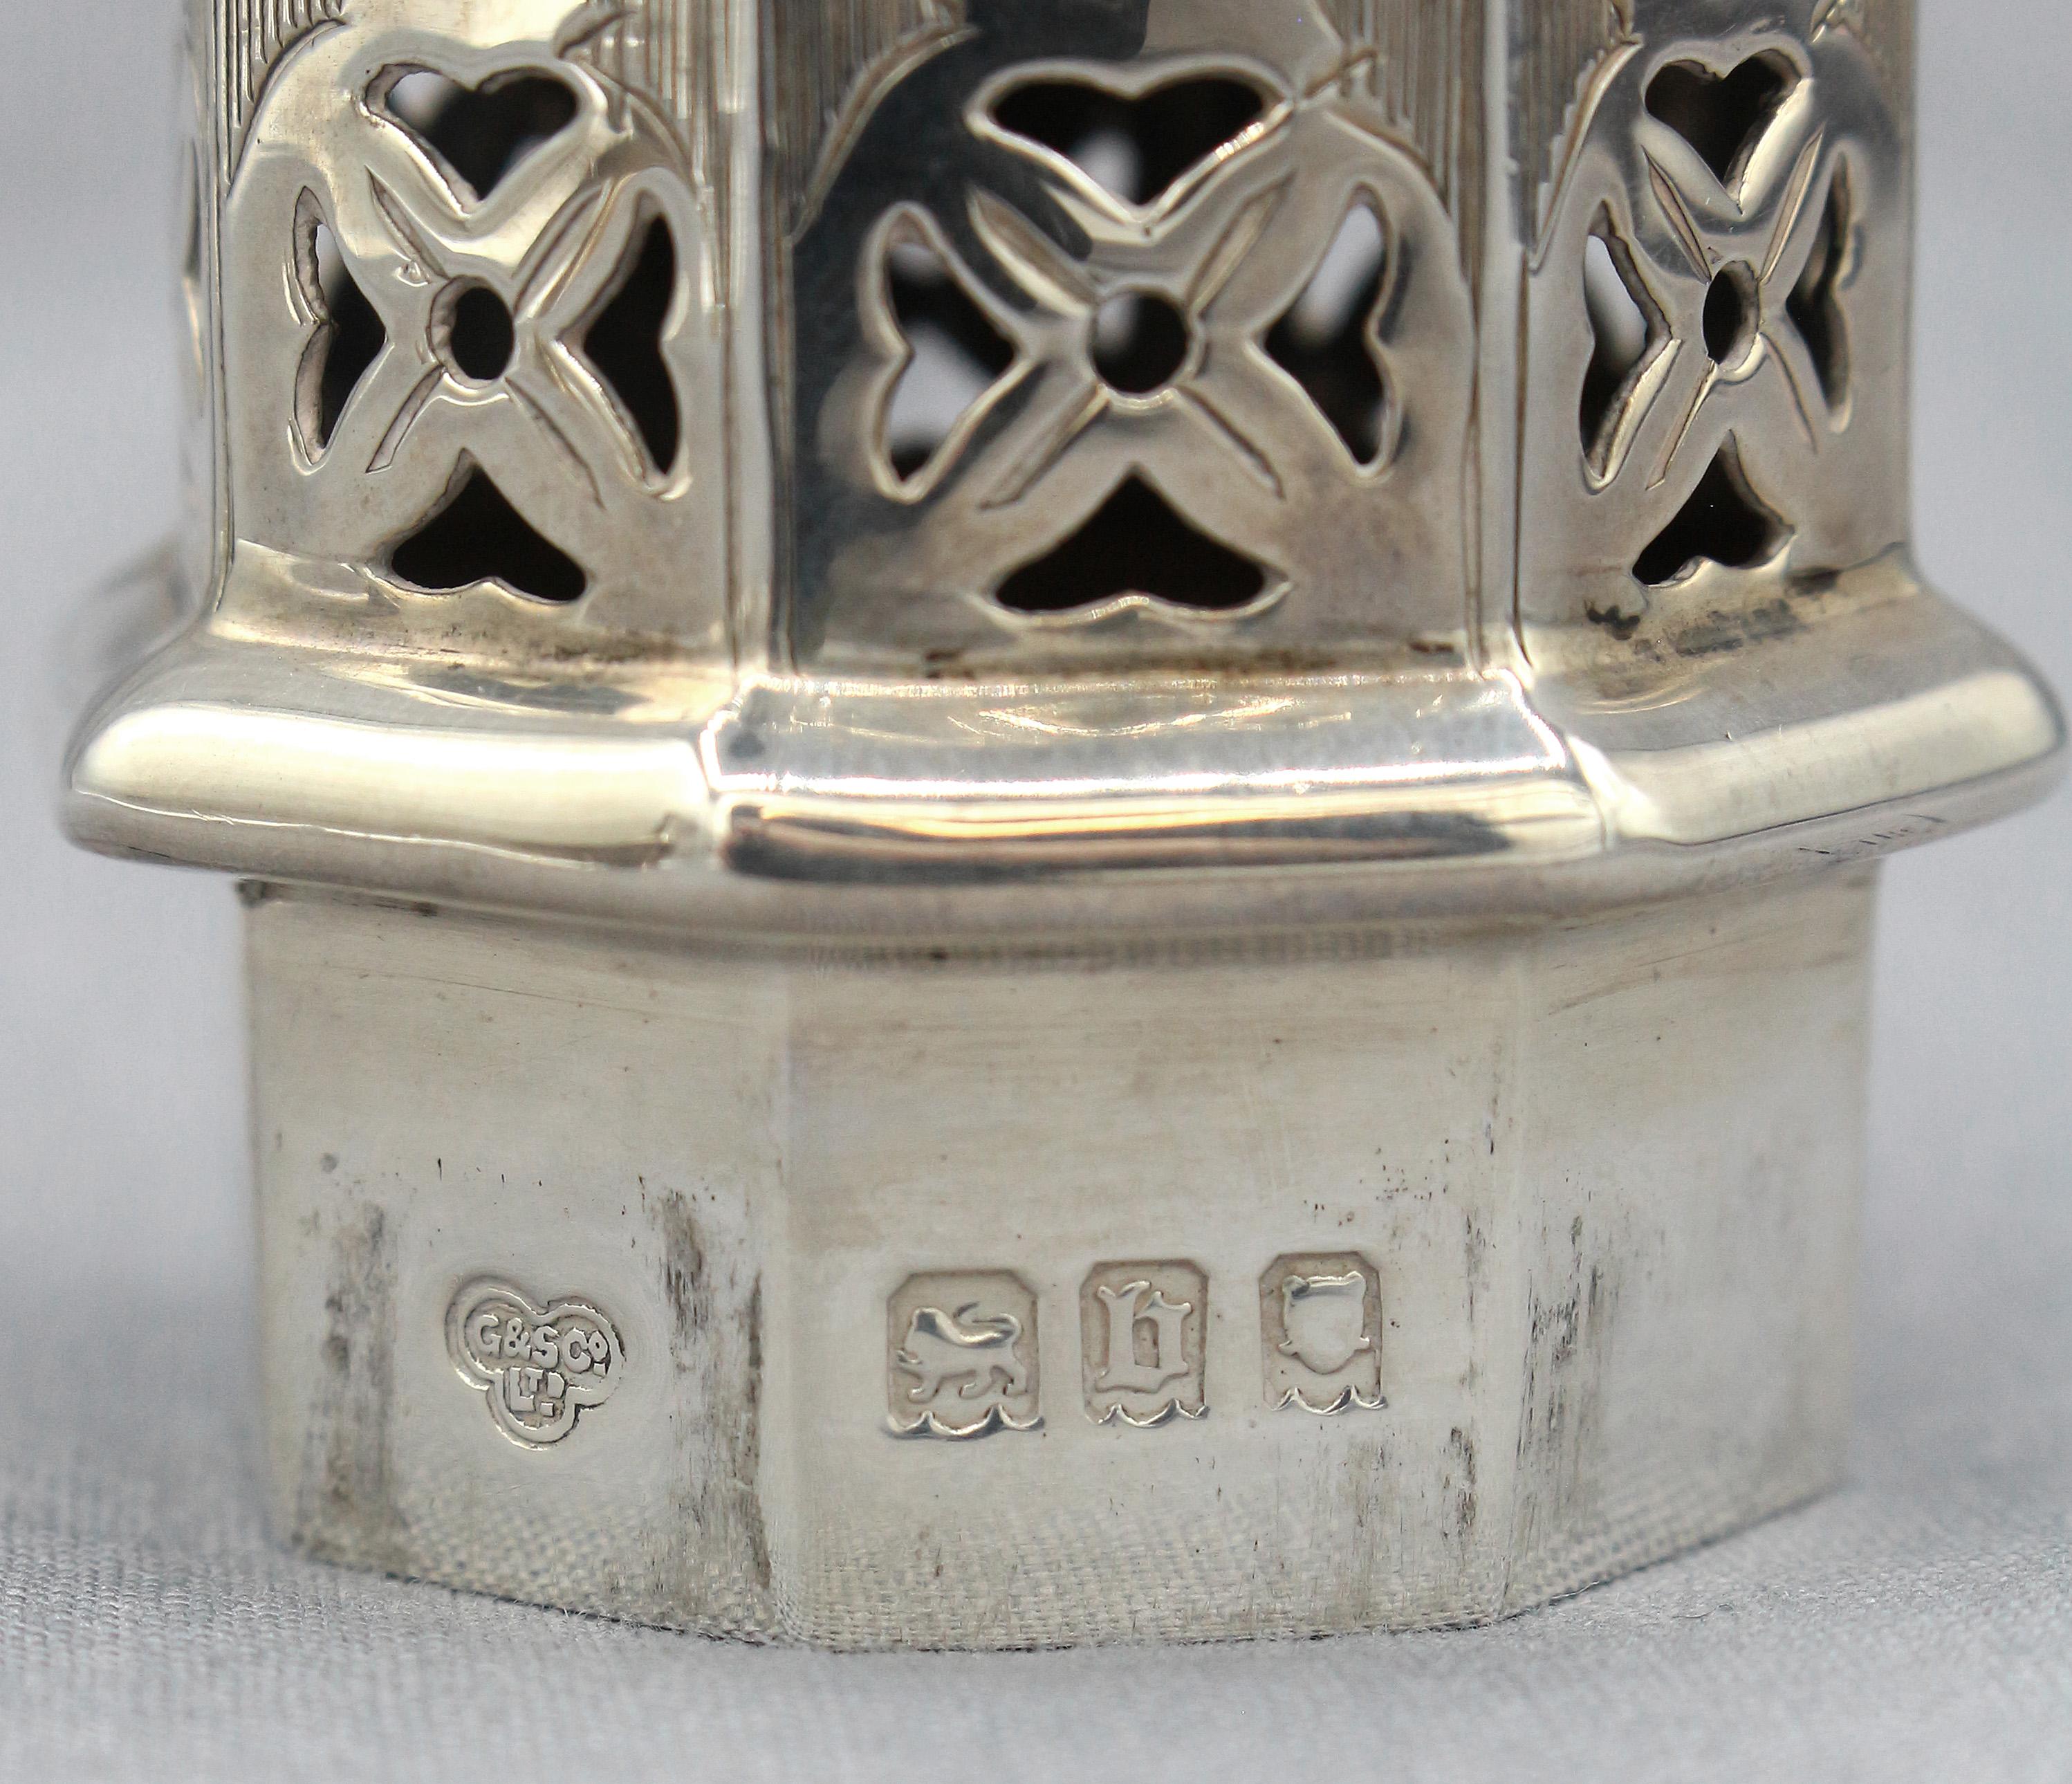 1917 Sterling Silver Sugar Caster by Goldsmiths & Silversmiths of London In Good Condition For Sale In Chapel Hill, NC